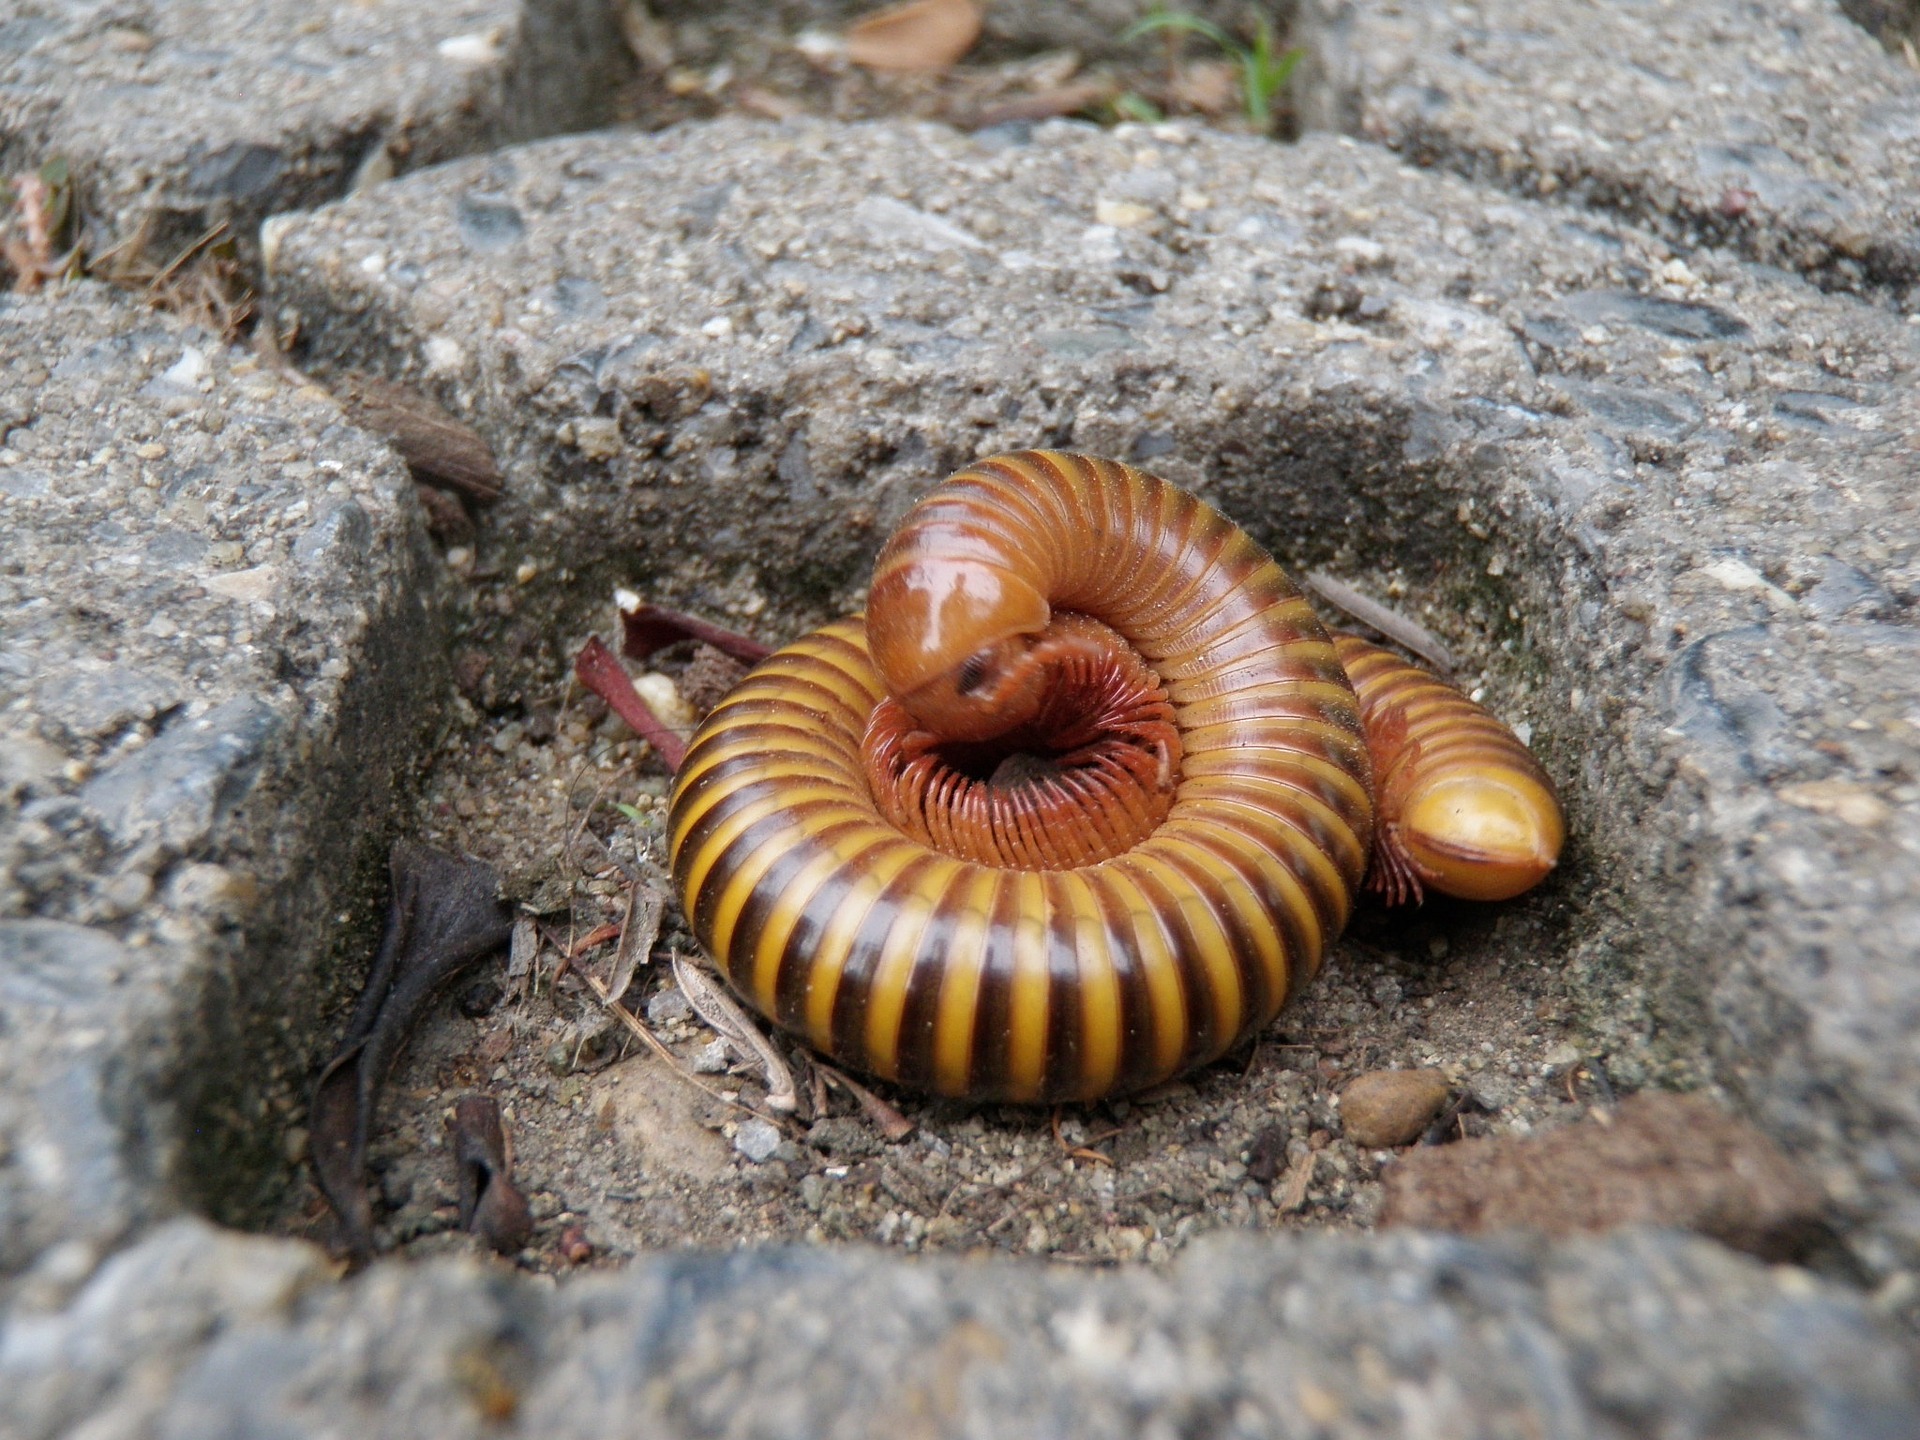 A black and yellow banded giant millipede coiled tightly.